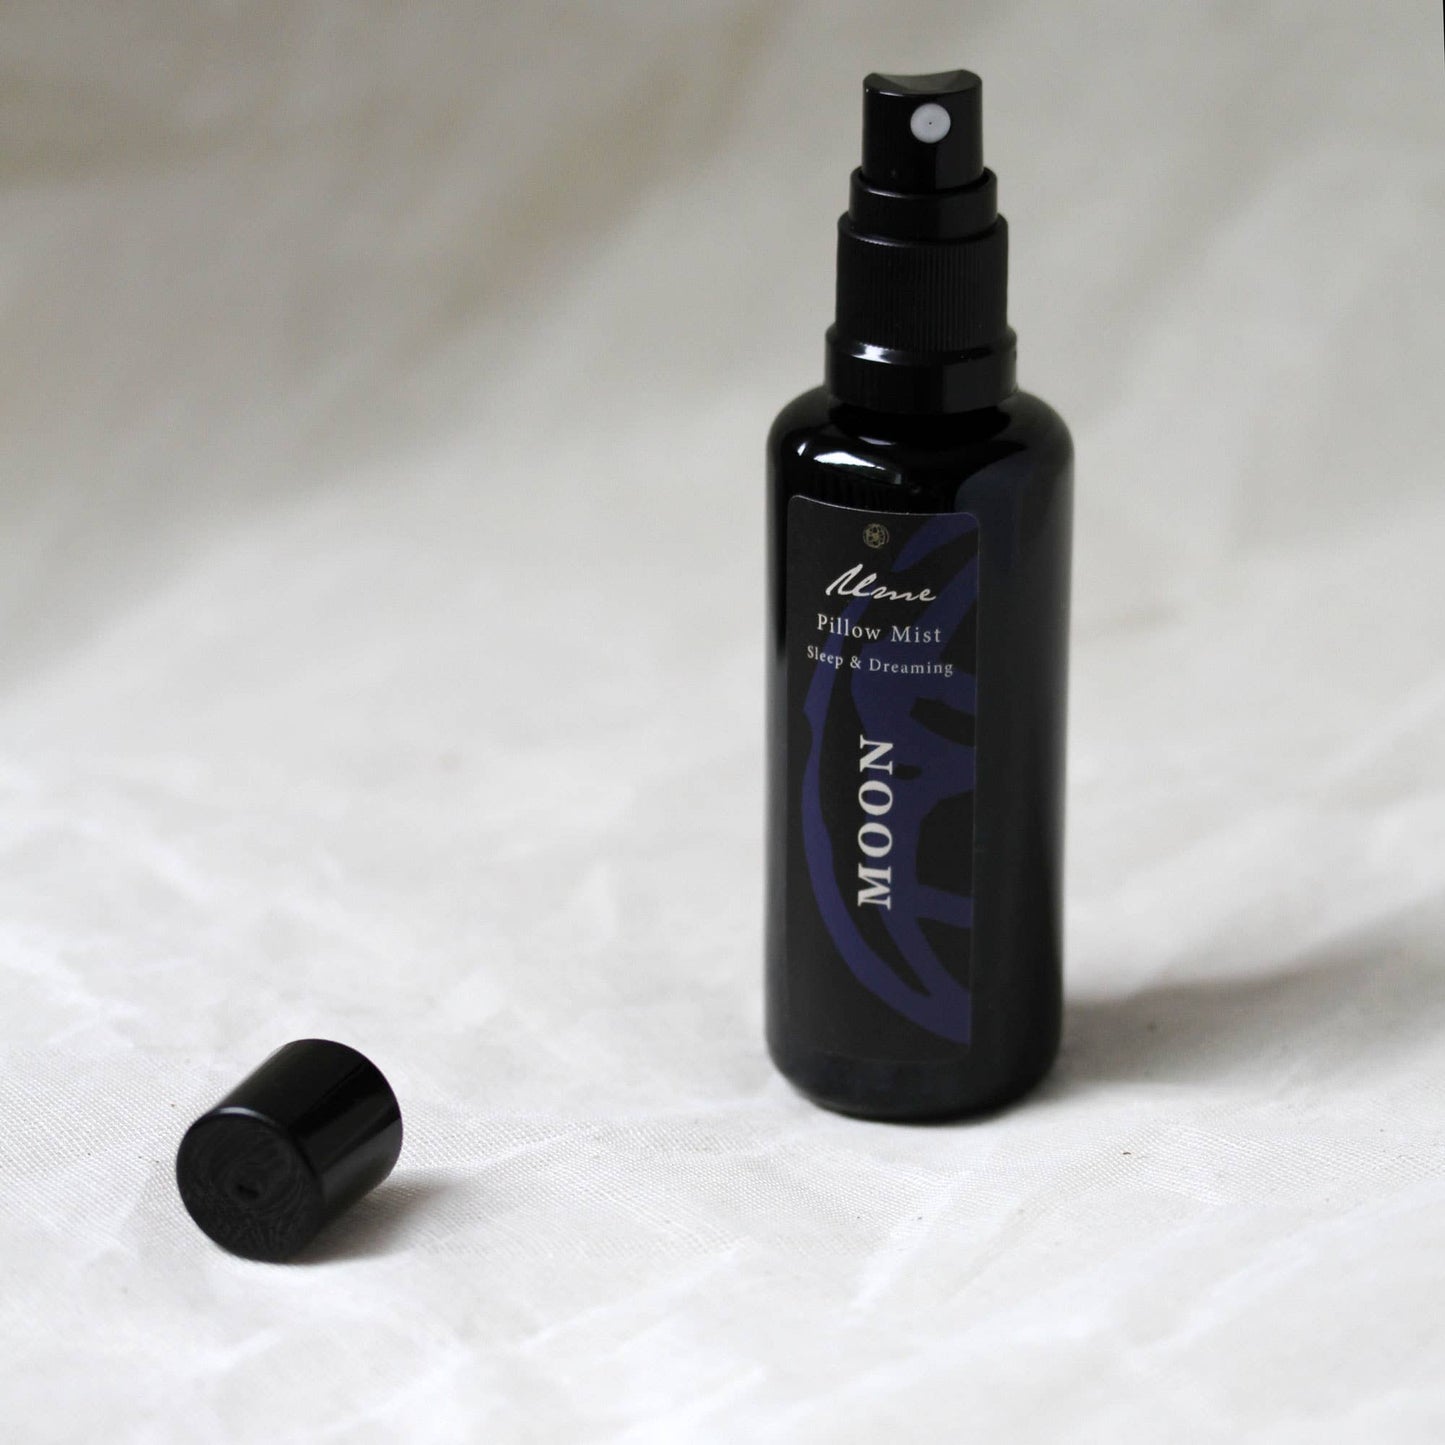 MOON Pillow Mist for Sleeping & Dreaming